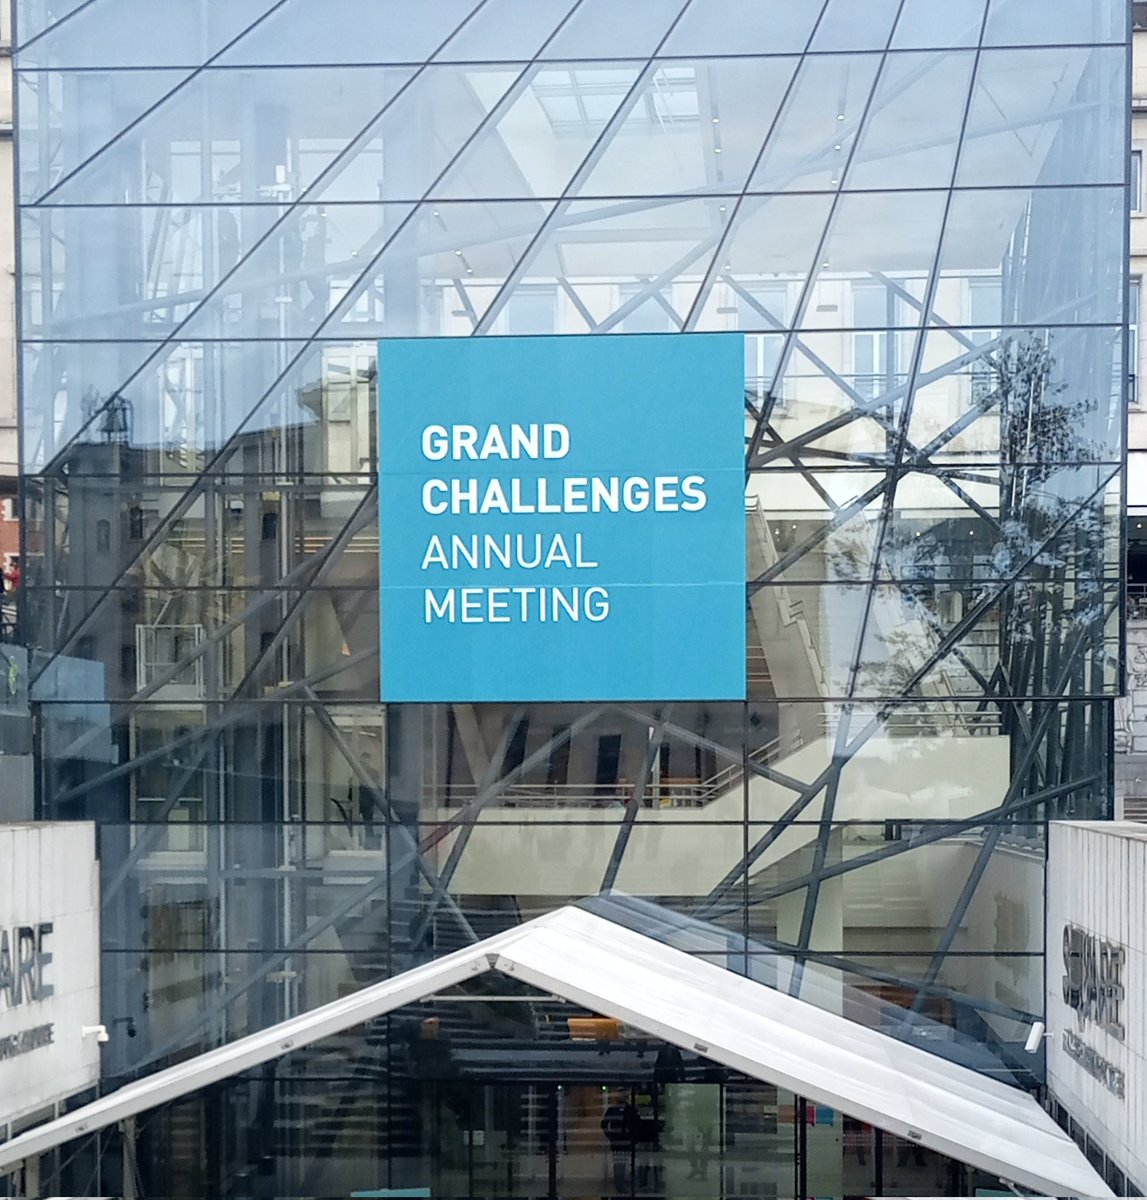 Honoured to attend  #GrandChallenges2022 in #Brussels and participate in discussions around how to prevent and prepare for the next pandemic. Thanks @IOyier and @gatesfoundation for the opportunity. @cebib_uon #pathogengenomics  #Bioinformatics